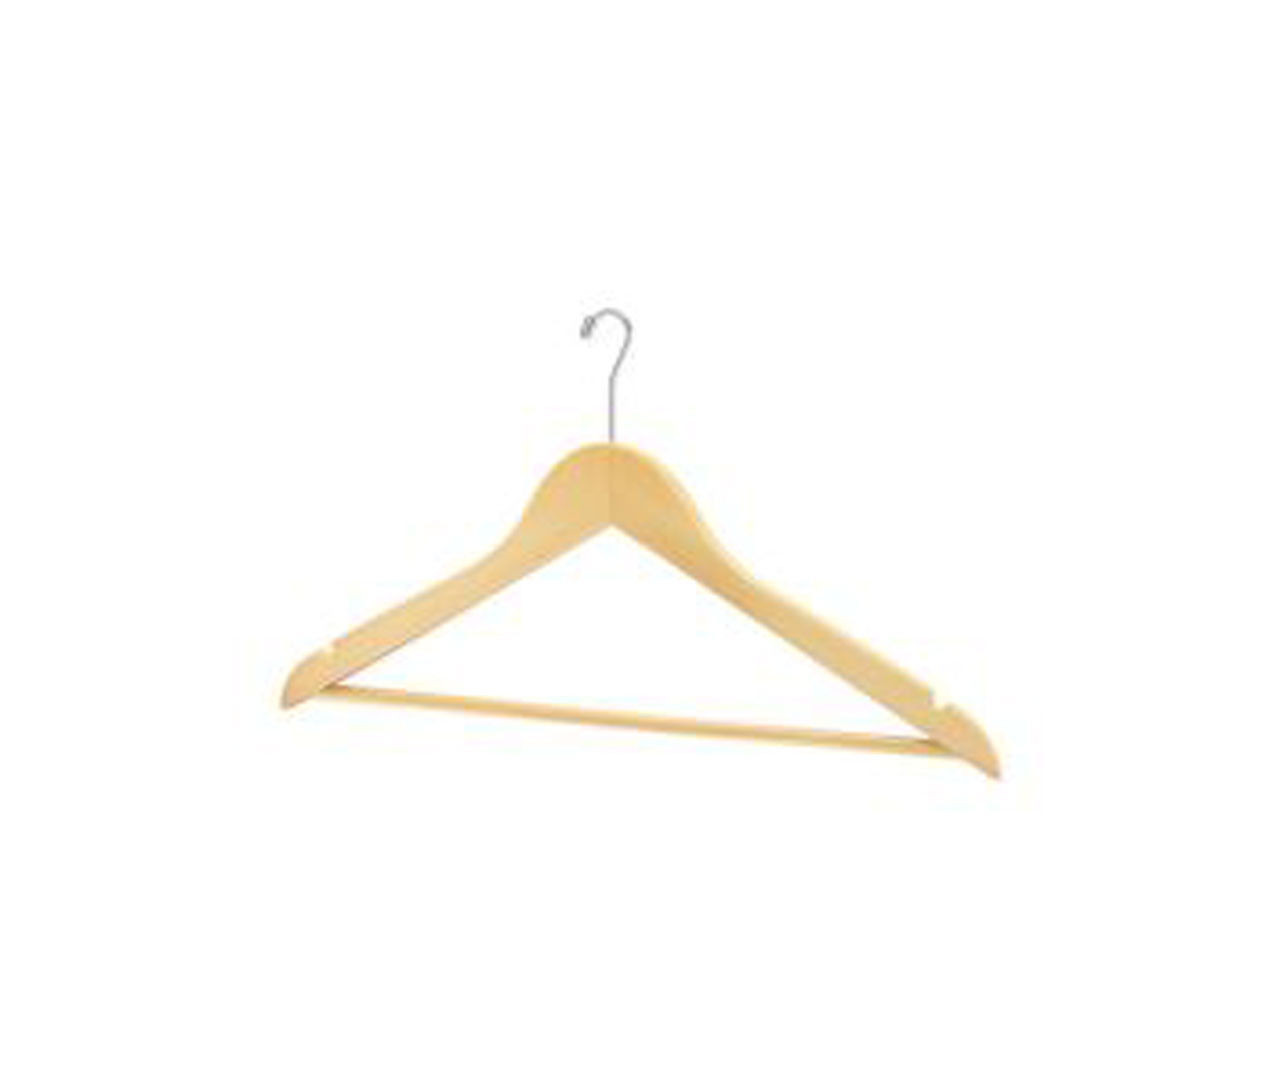 https://cdn11.bigcommerce.com/s-zd141b7qtp/images/stencil/1280x1280/products/48407/154700/small-hook-suit-hangers-with-slack-bars-bulk-case-of-100-pieces-whitmor__23714.1706608634.jpg?c=1